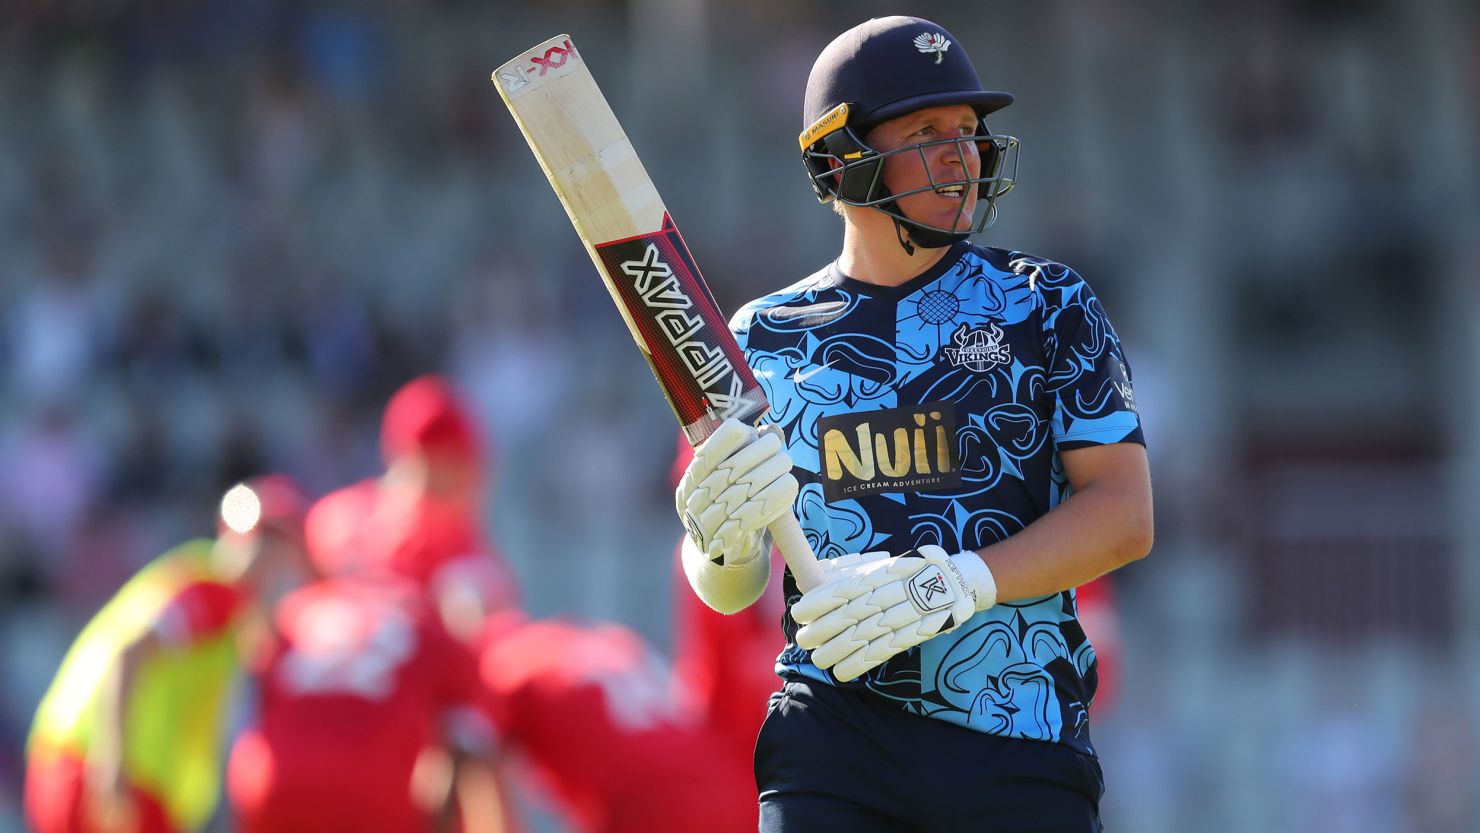 Ballance is seen representing the Yorkshire Vikings during this year's T20 Blast.